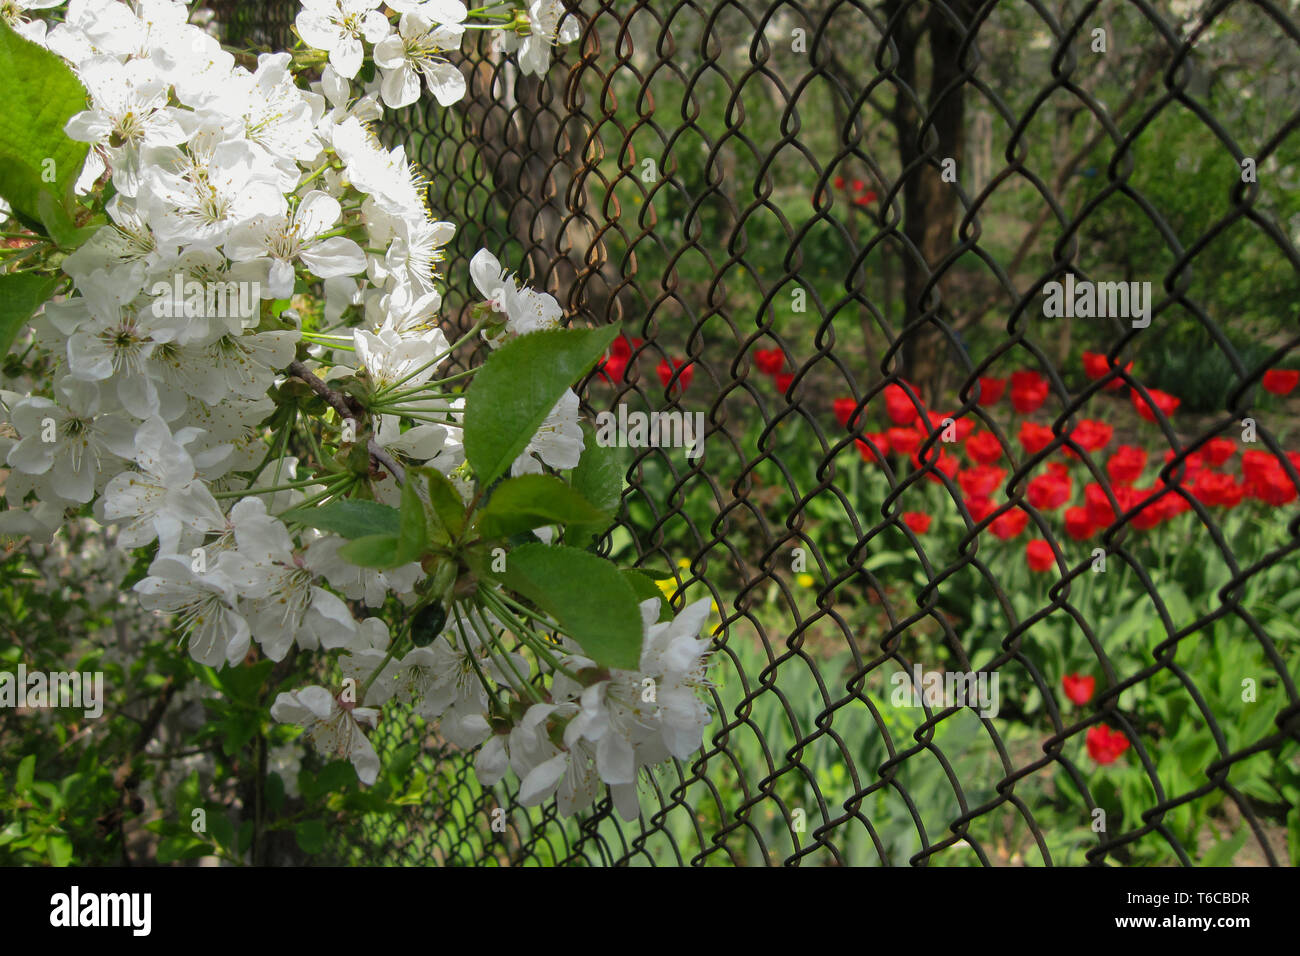 Cherry flowers on branch near diamond mesh fence of garden. Tulips with selective focus on blurred background Stock Photo